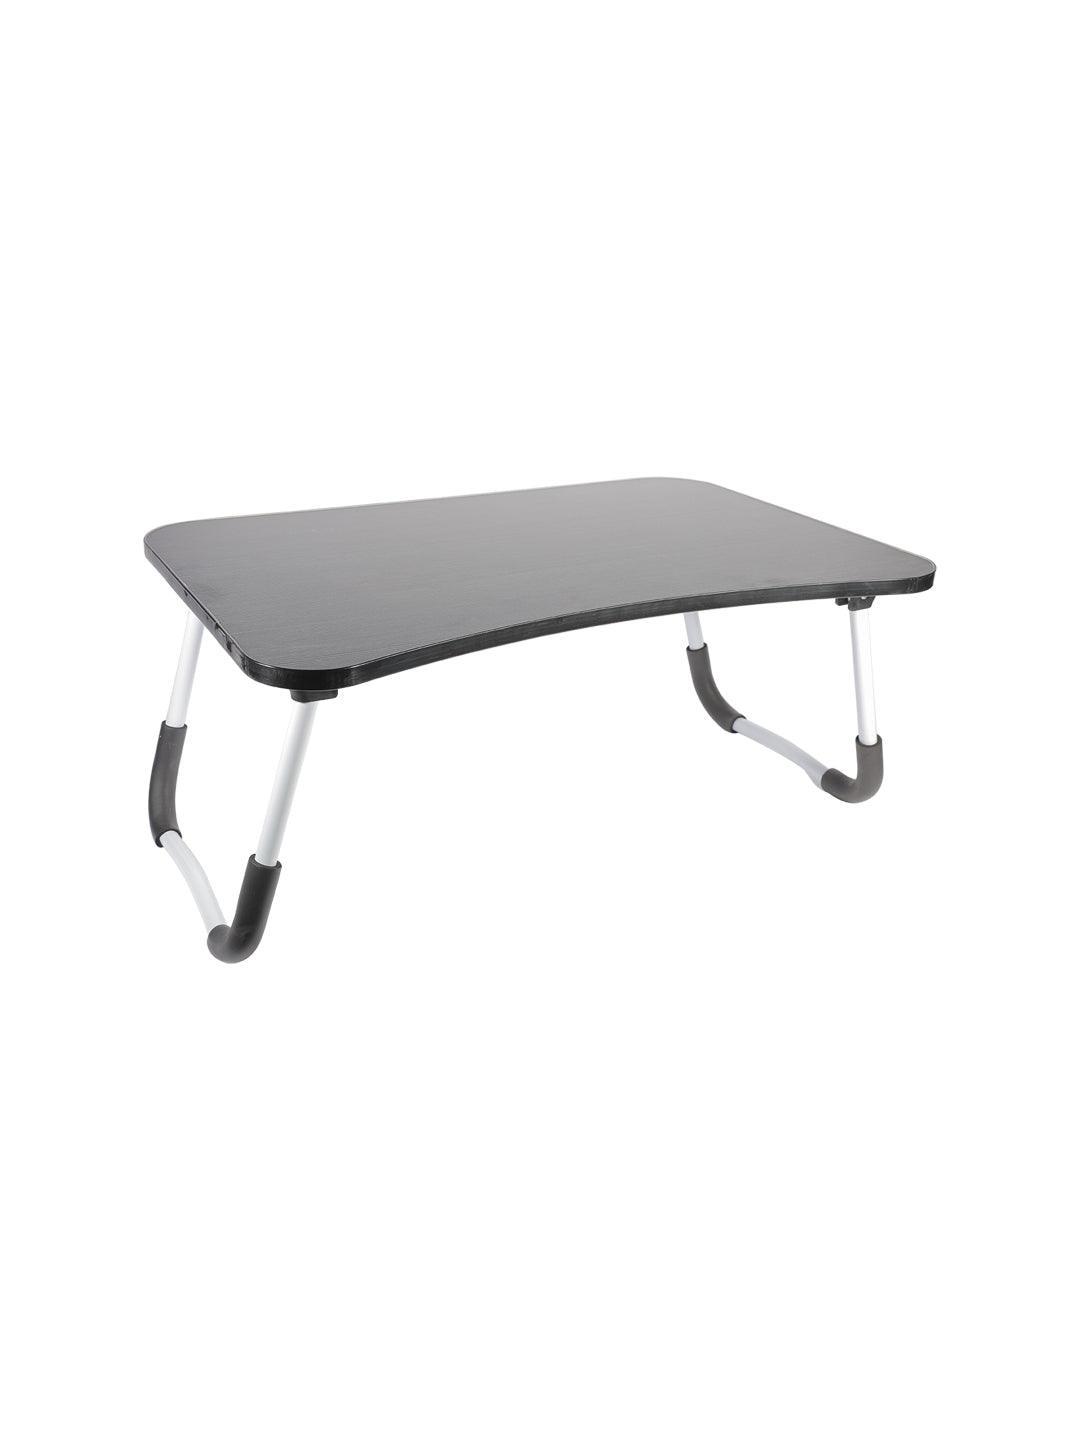 Market 99 Foldable And Portable Wooden Laptop Table - MARKET 99